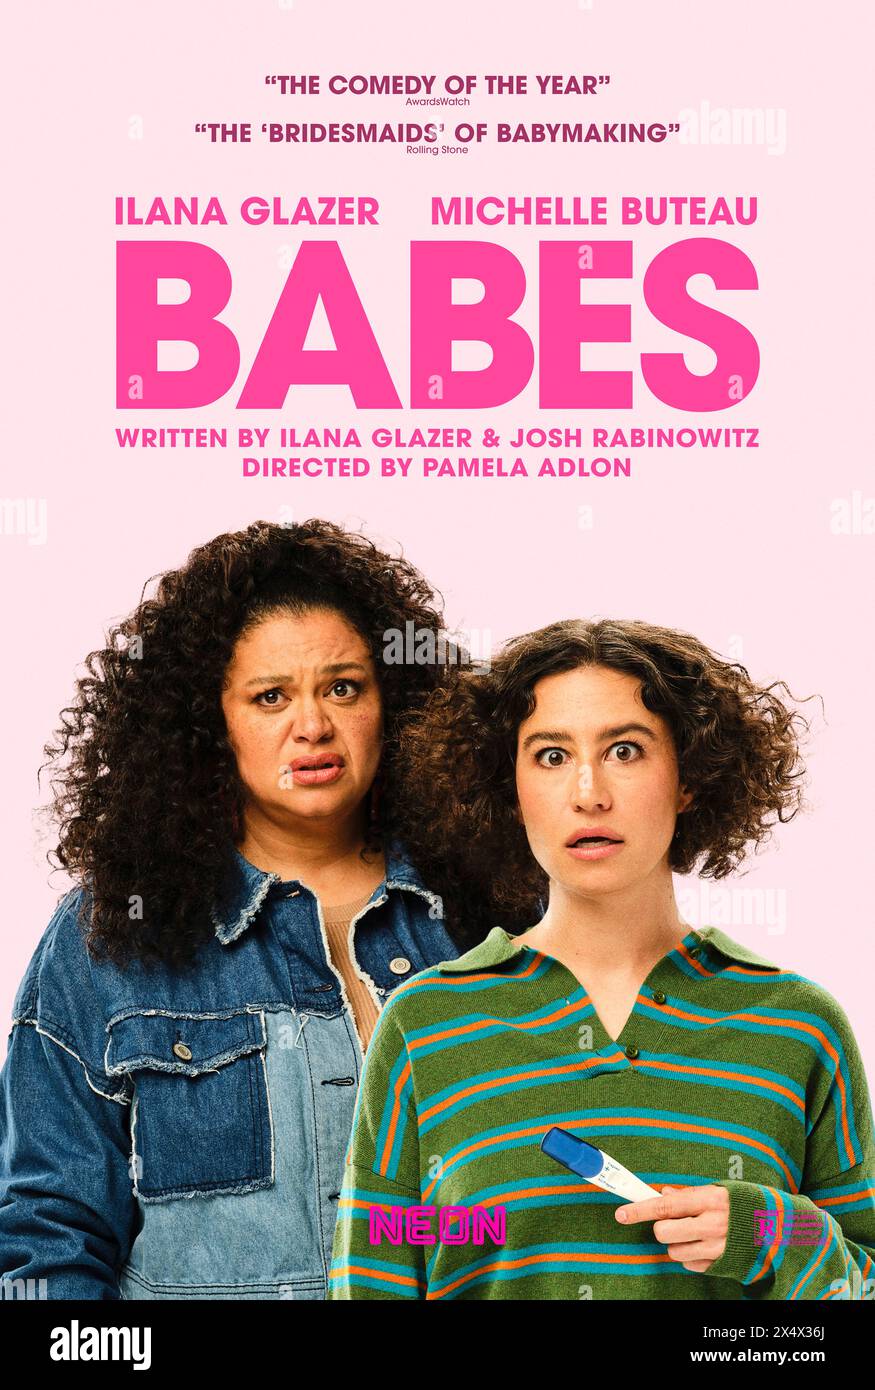 Babes (2024) directed by Pamela Adlon and starring Shola Adewusi, Sandra Bernhard and Michelle Buteau. It tells the story of Eden who becomes pregnant from a one-night-stand and leans on her married best friend and mother of two to guide her. US one sheet poster.***EDITORIAL USE ONLY*** Credit: BFA / Neon Stock Photo